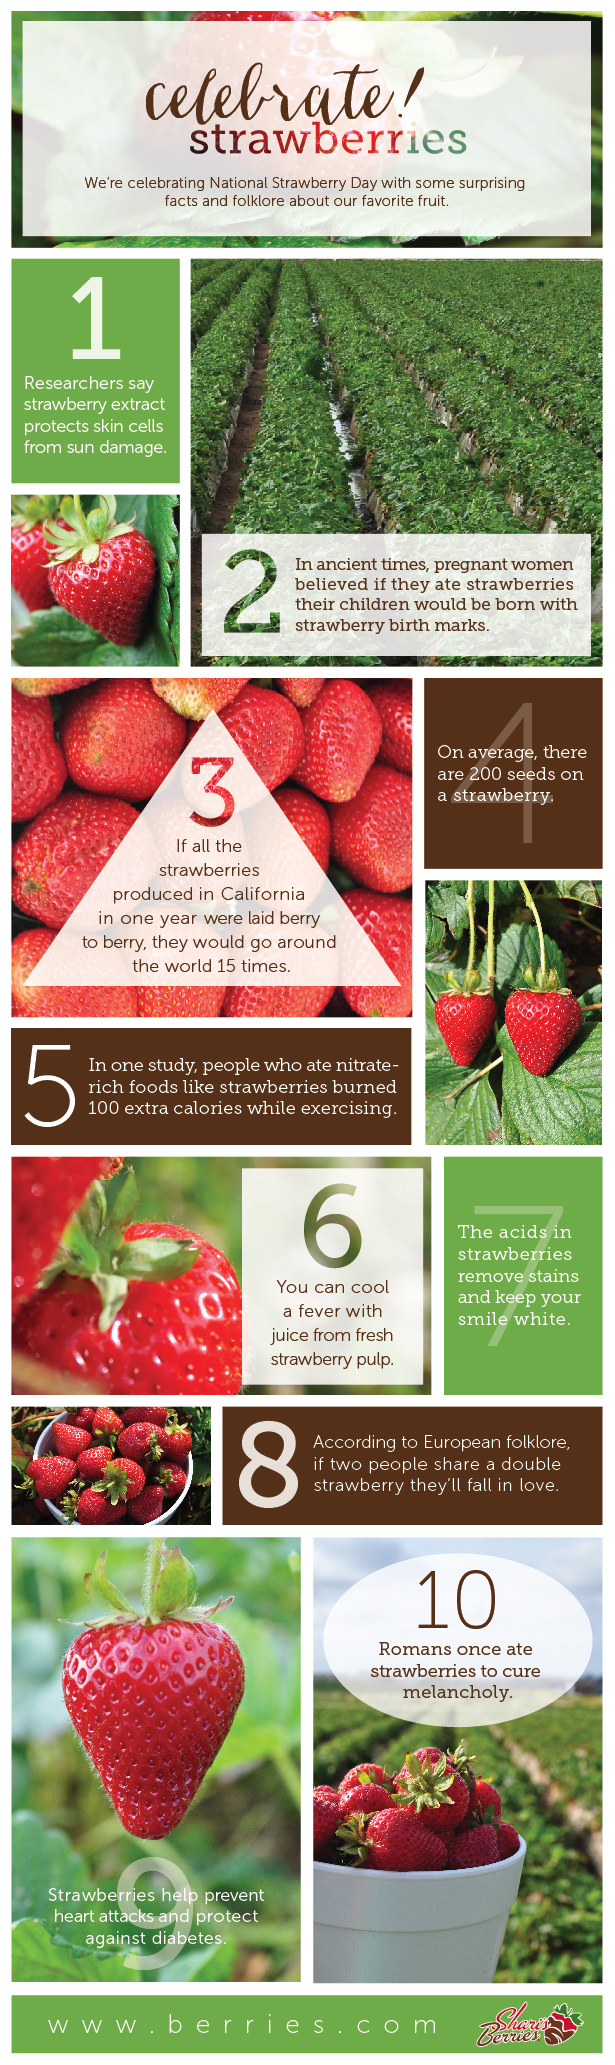 Facts and folklore about strawberries | National Strawberry Day | Infographic | The Momiverse